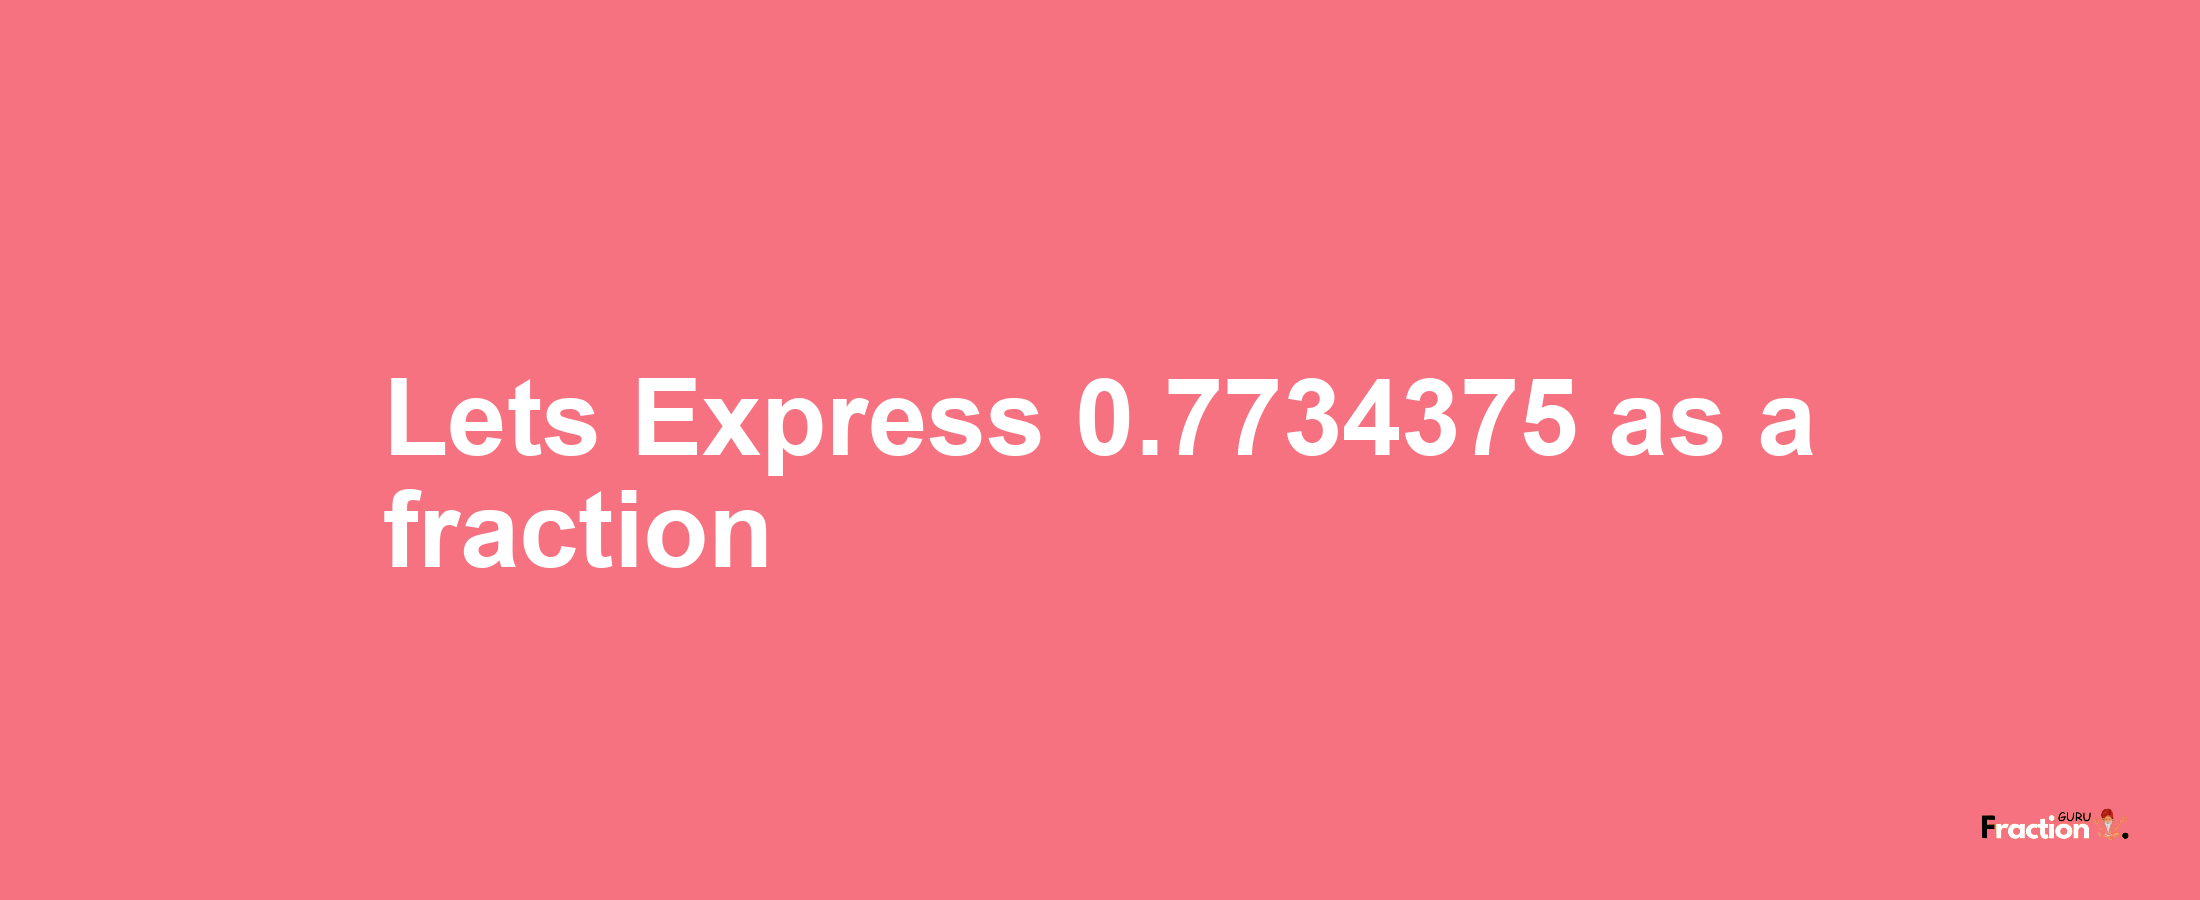 Lets Express 0.7734375 as afraction